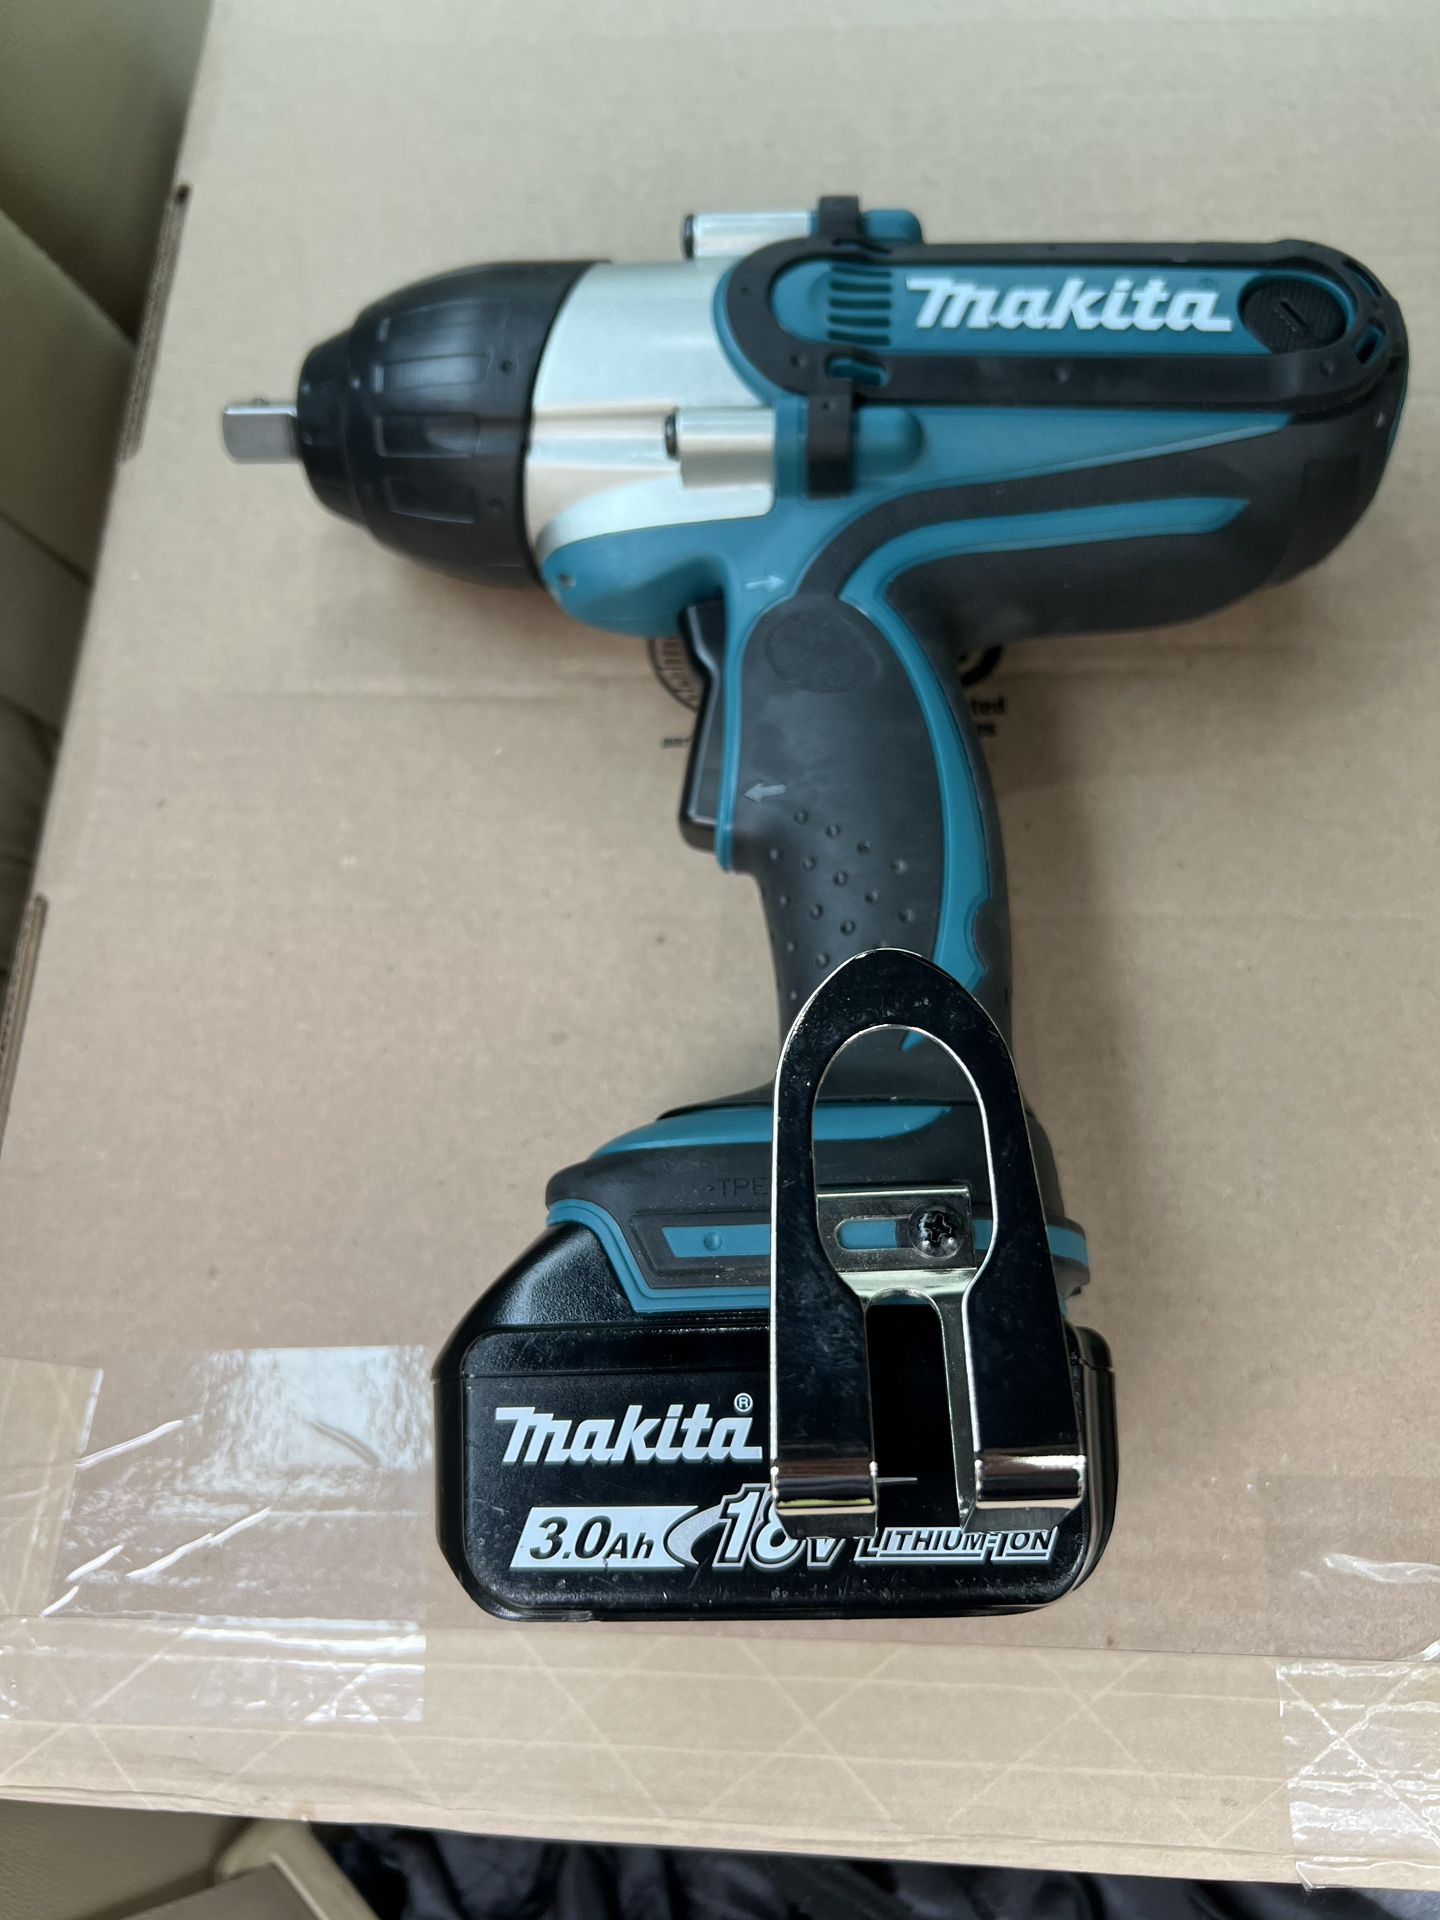 Makita 18V LXT Lithium-Ion 1/2 in. Cordless High Torque Impact Wrench